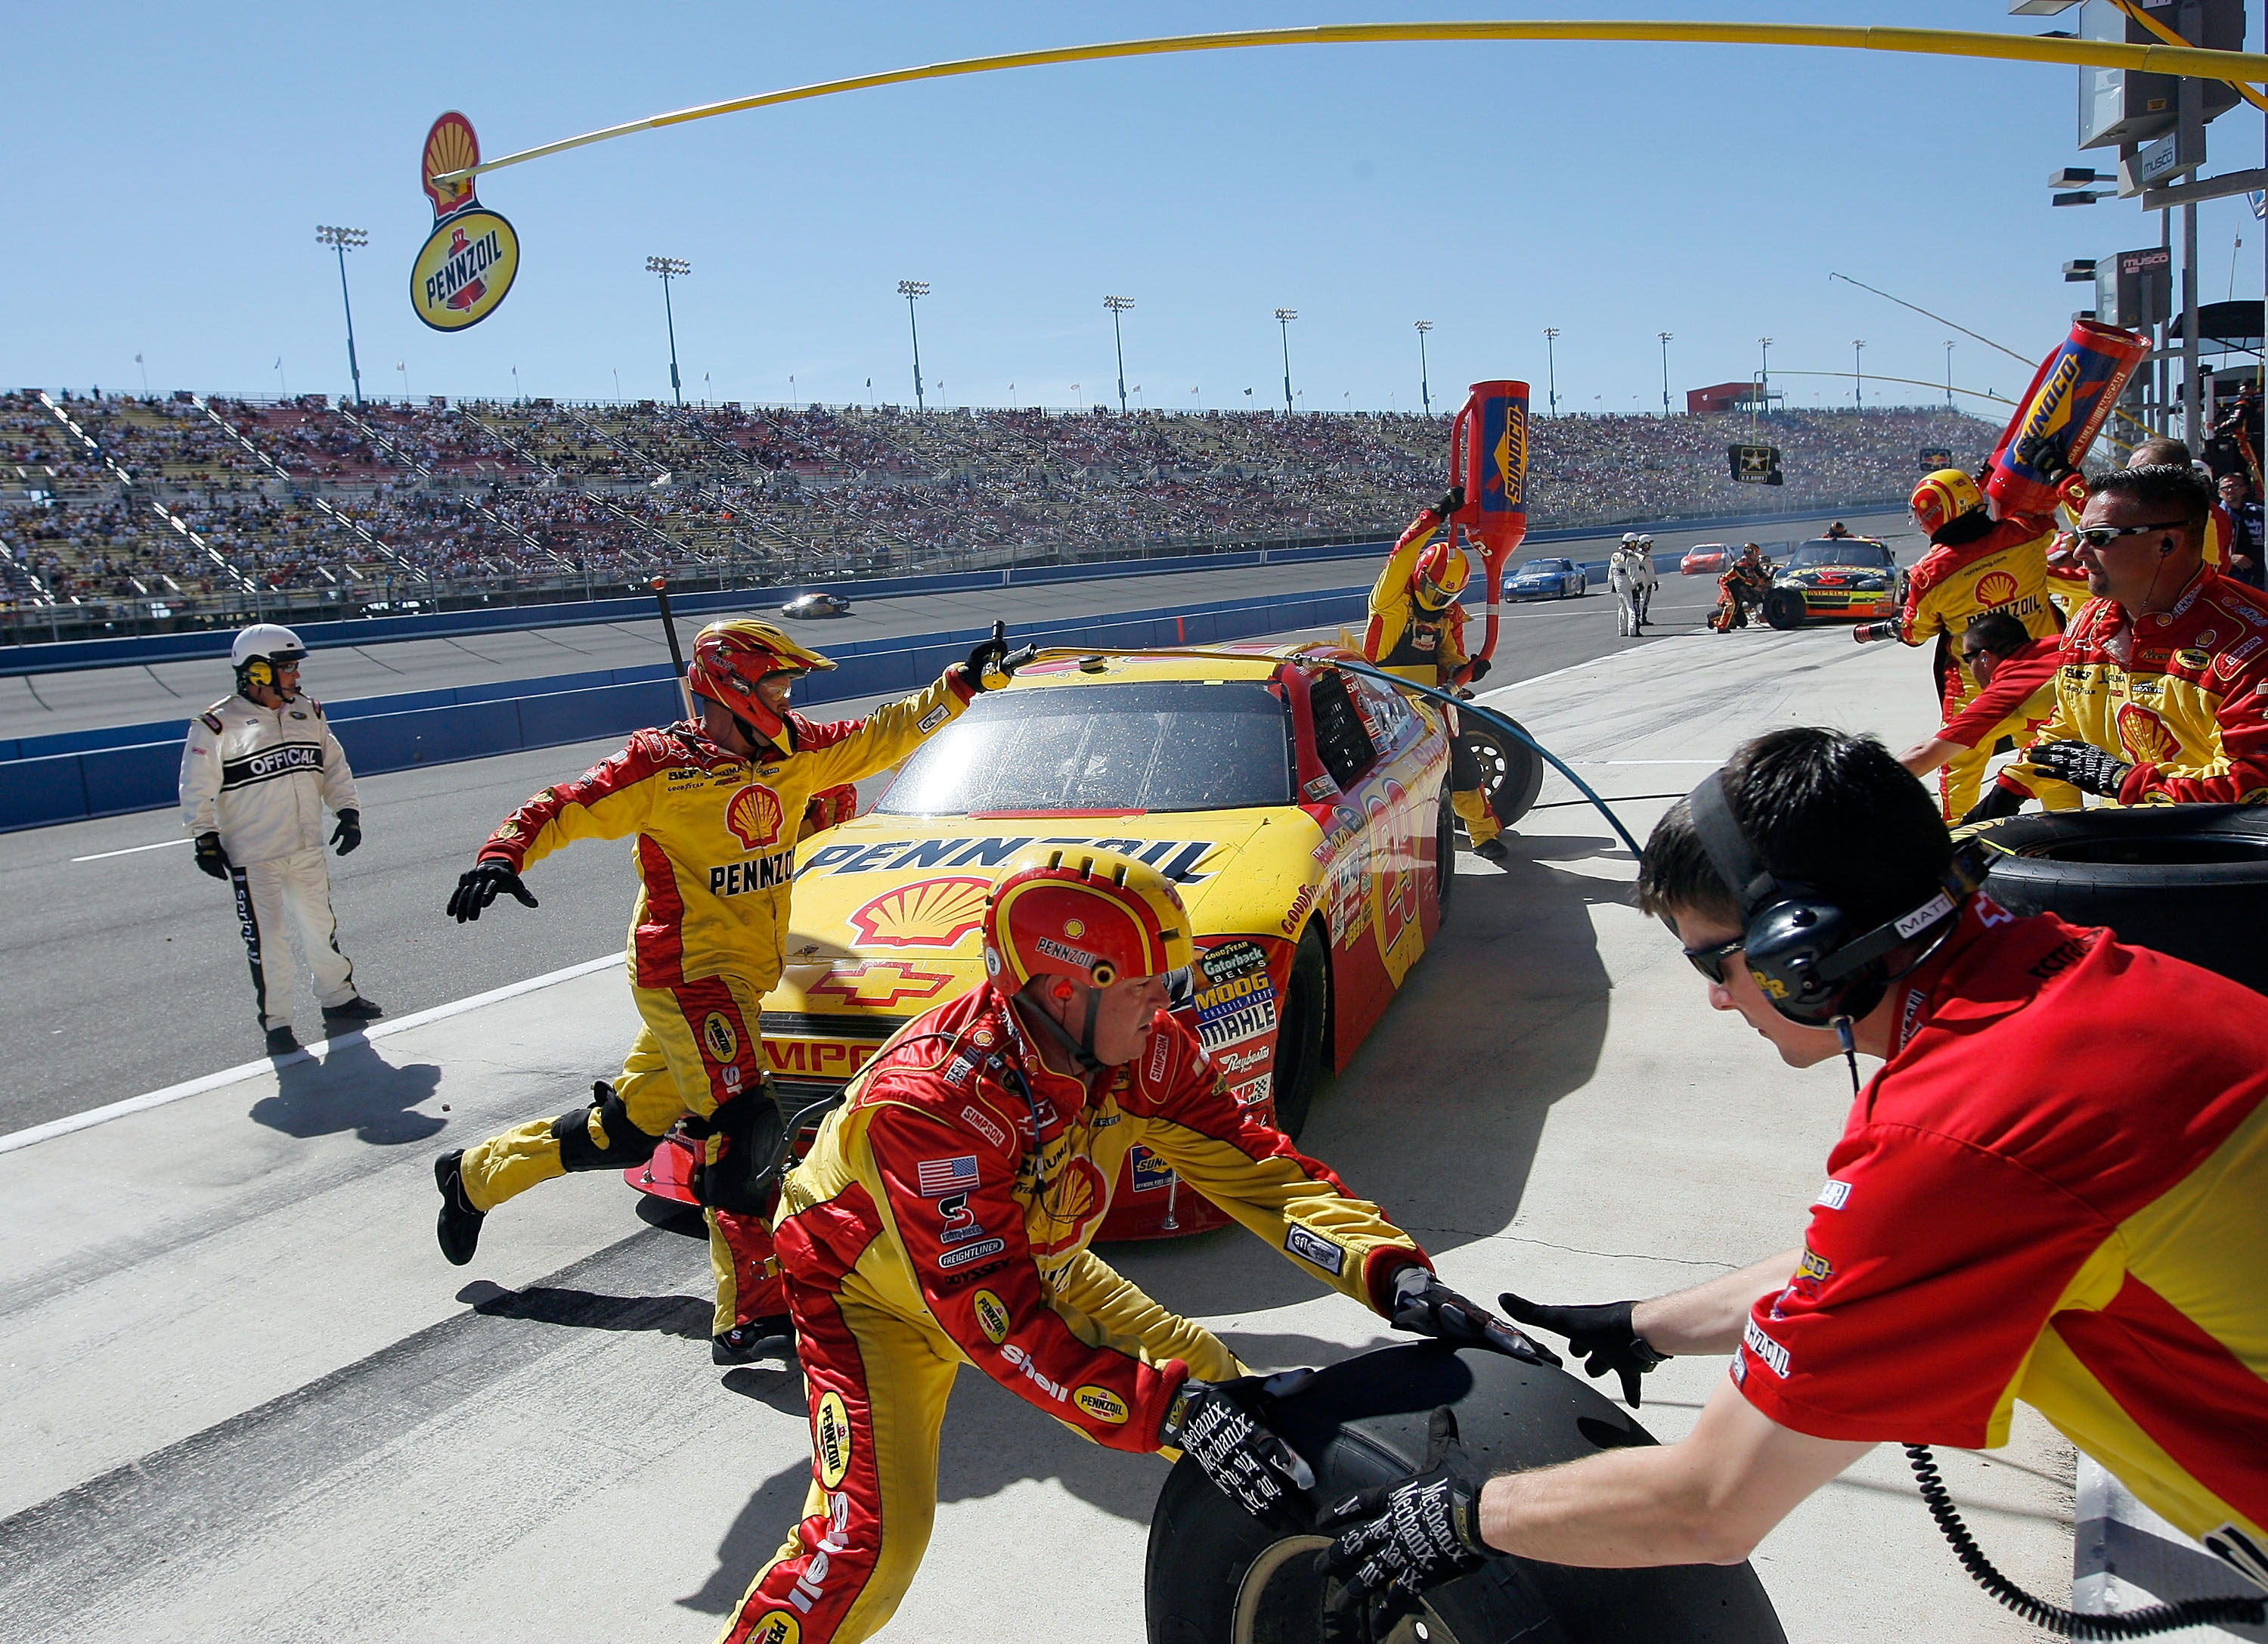 FONTANA, CA - OCTOBER 10:  Kevin Harvick, driver of the #29 Shell/Pennzoil Chevrolet, makes a pit stop during the NASCAR Sprint Cup Series Pepsi Max 400 on October 10, 2010 in Fontana, California.  (Photo by Tom Pennington/Getty Images for NASCAR)